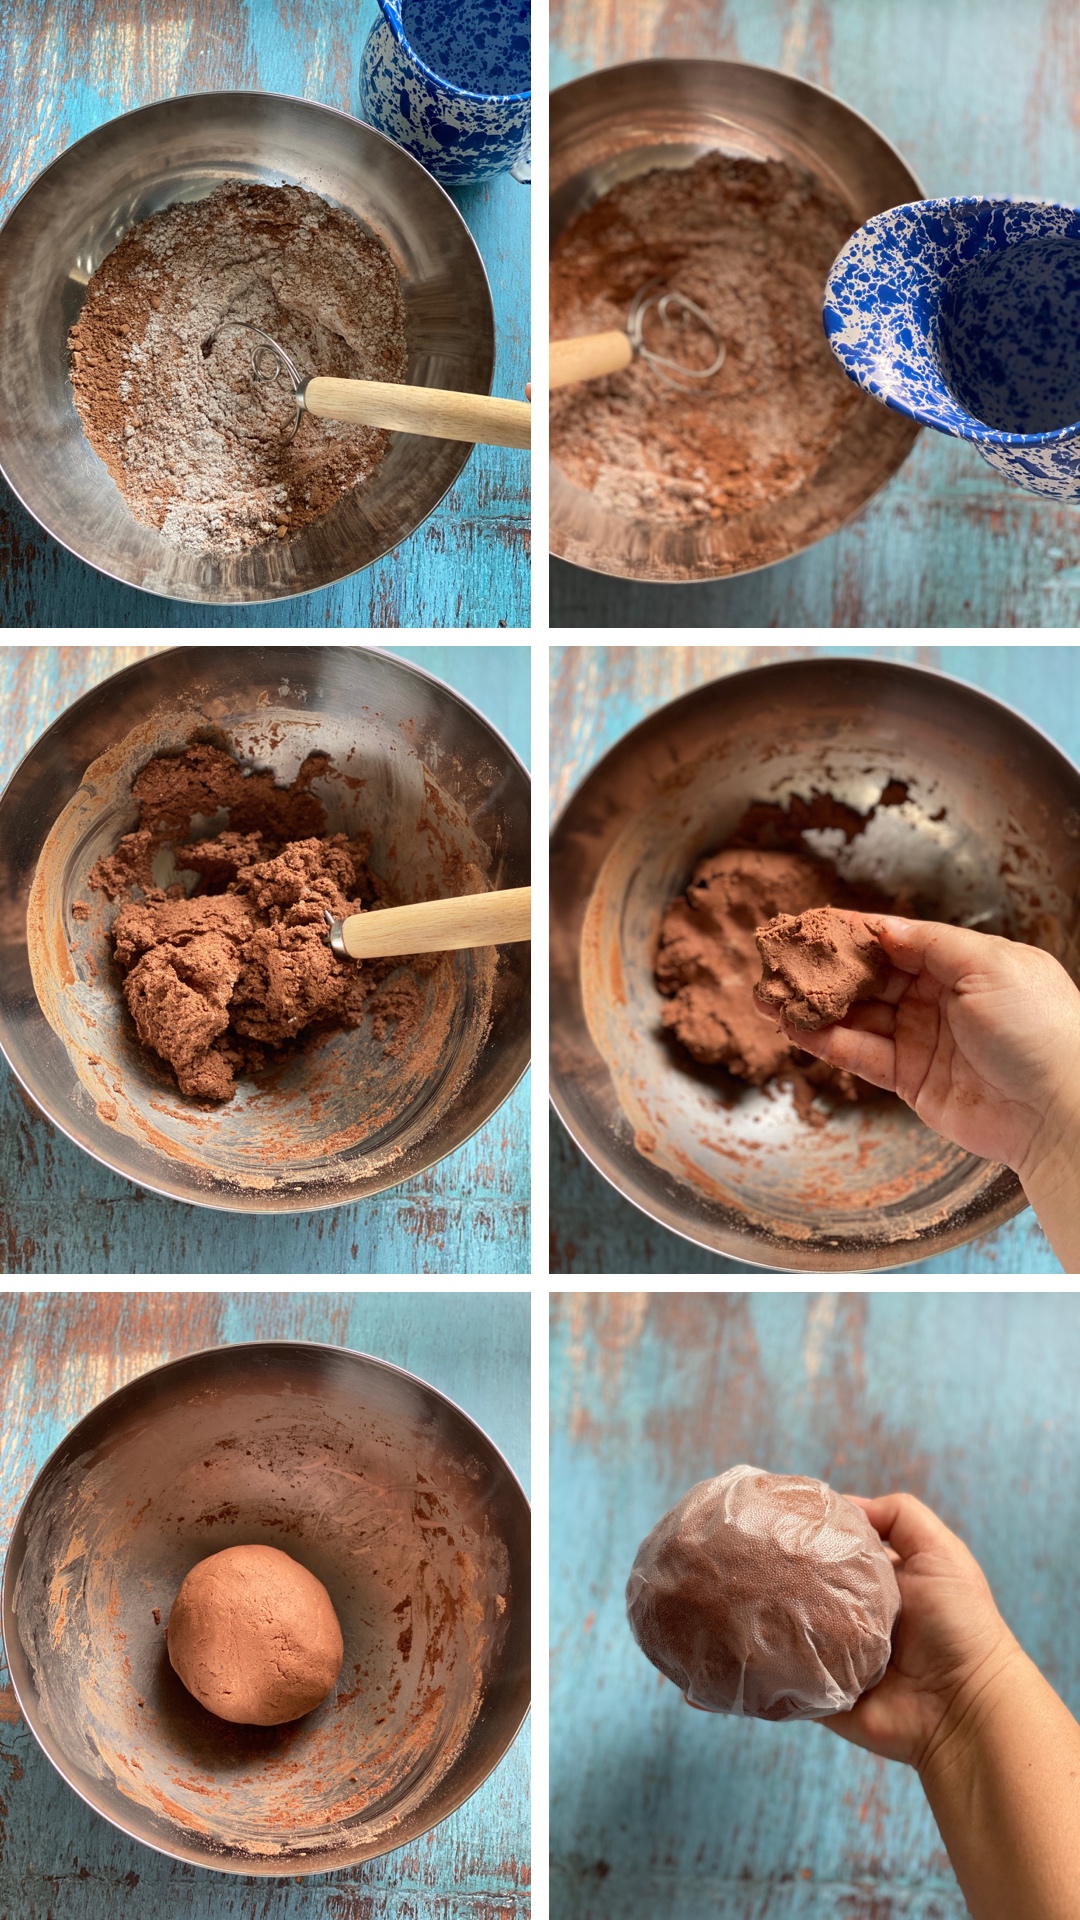 a collage showing the step by step how to make cocoa masa with blue corn masa harina for pozol